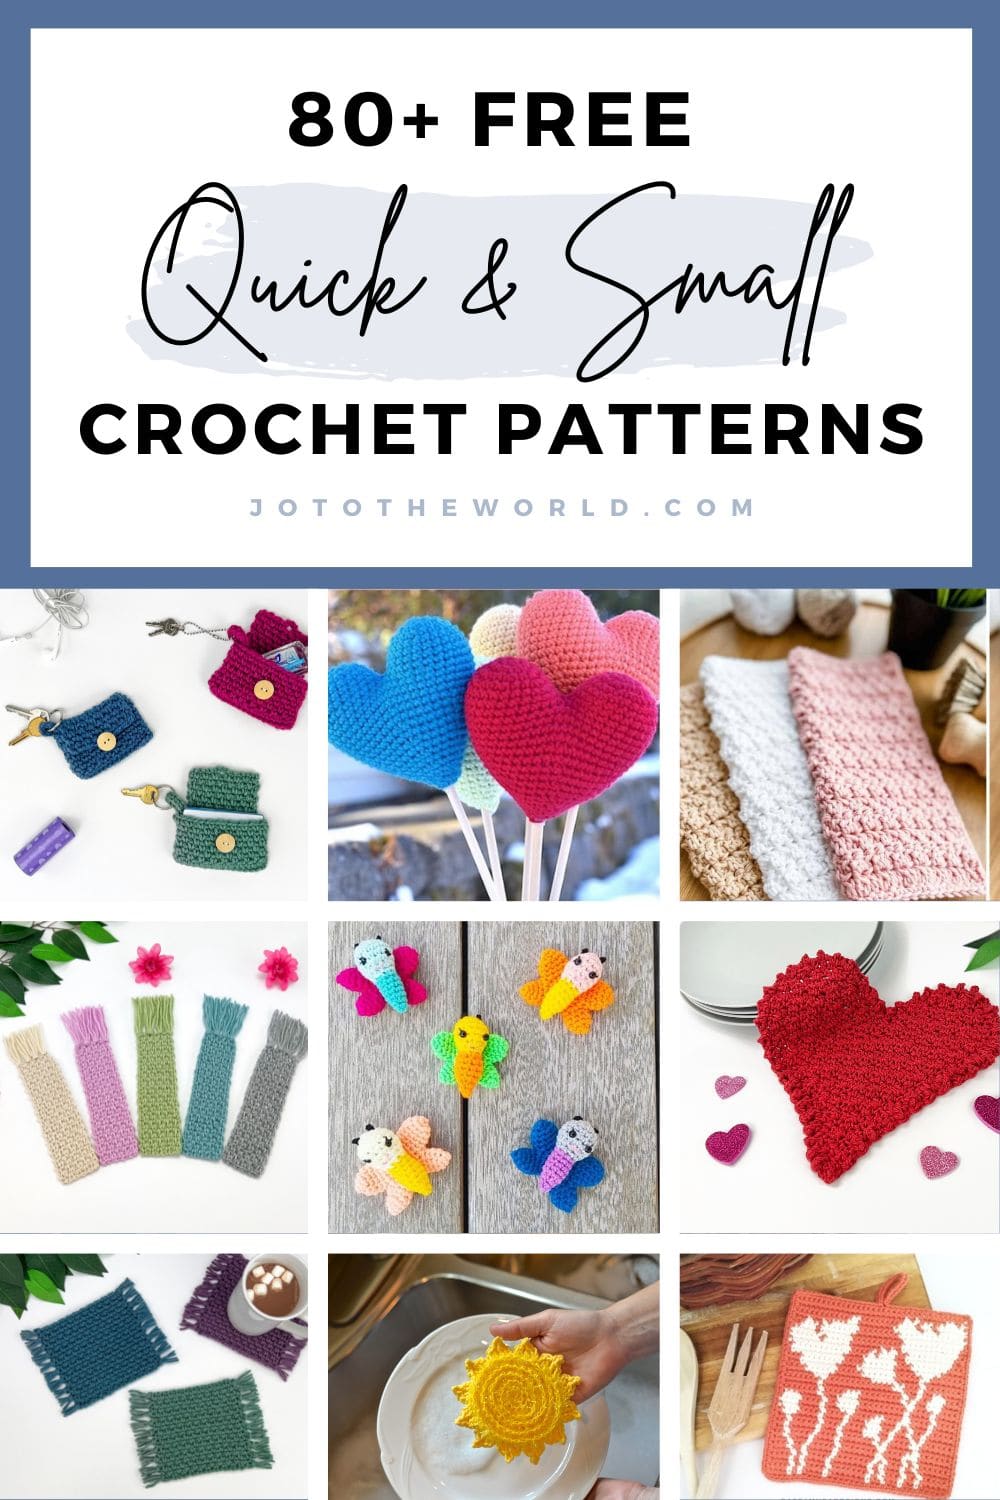 Small crochet projects - free patterns